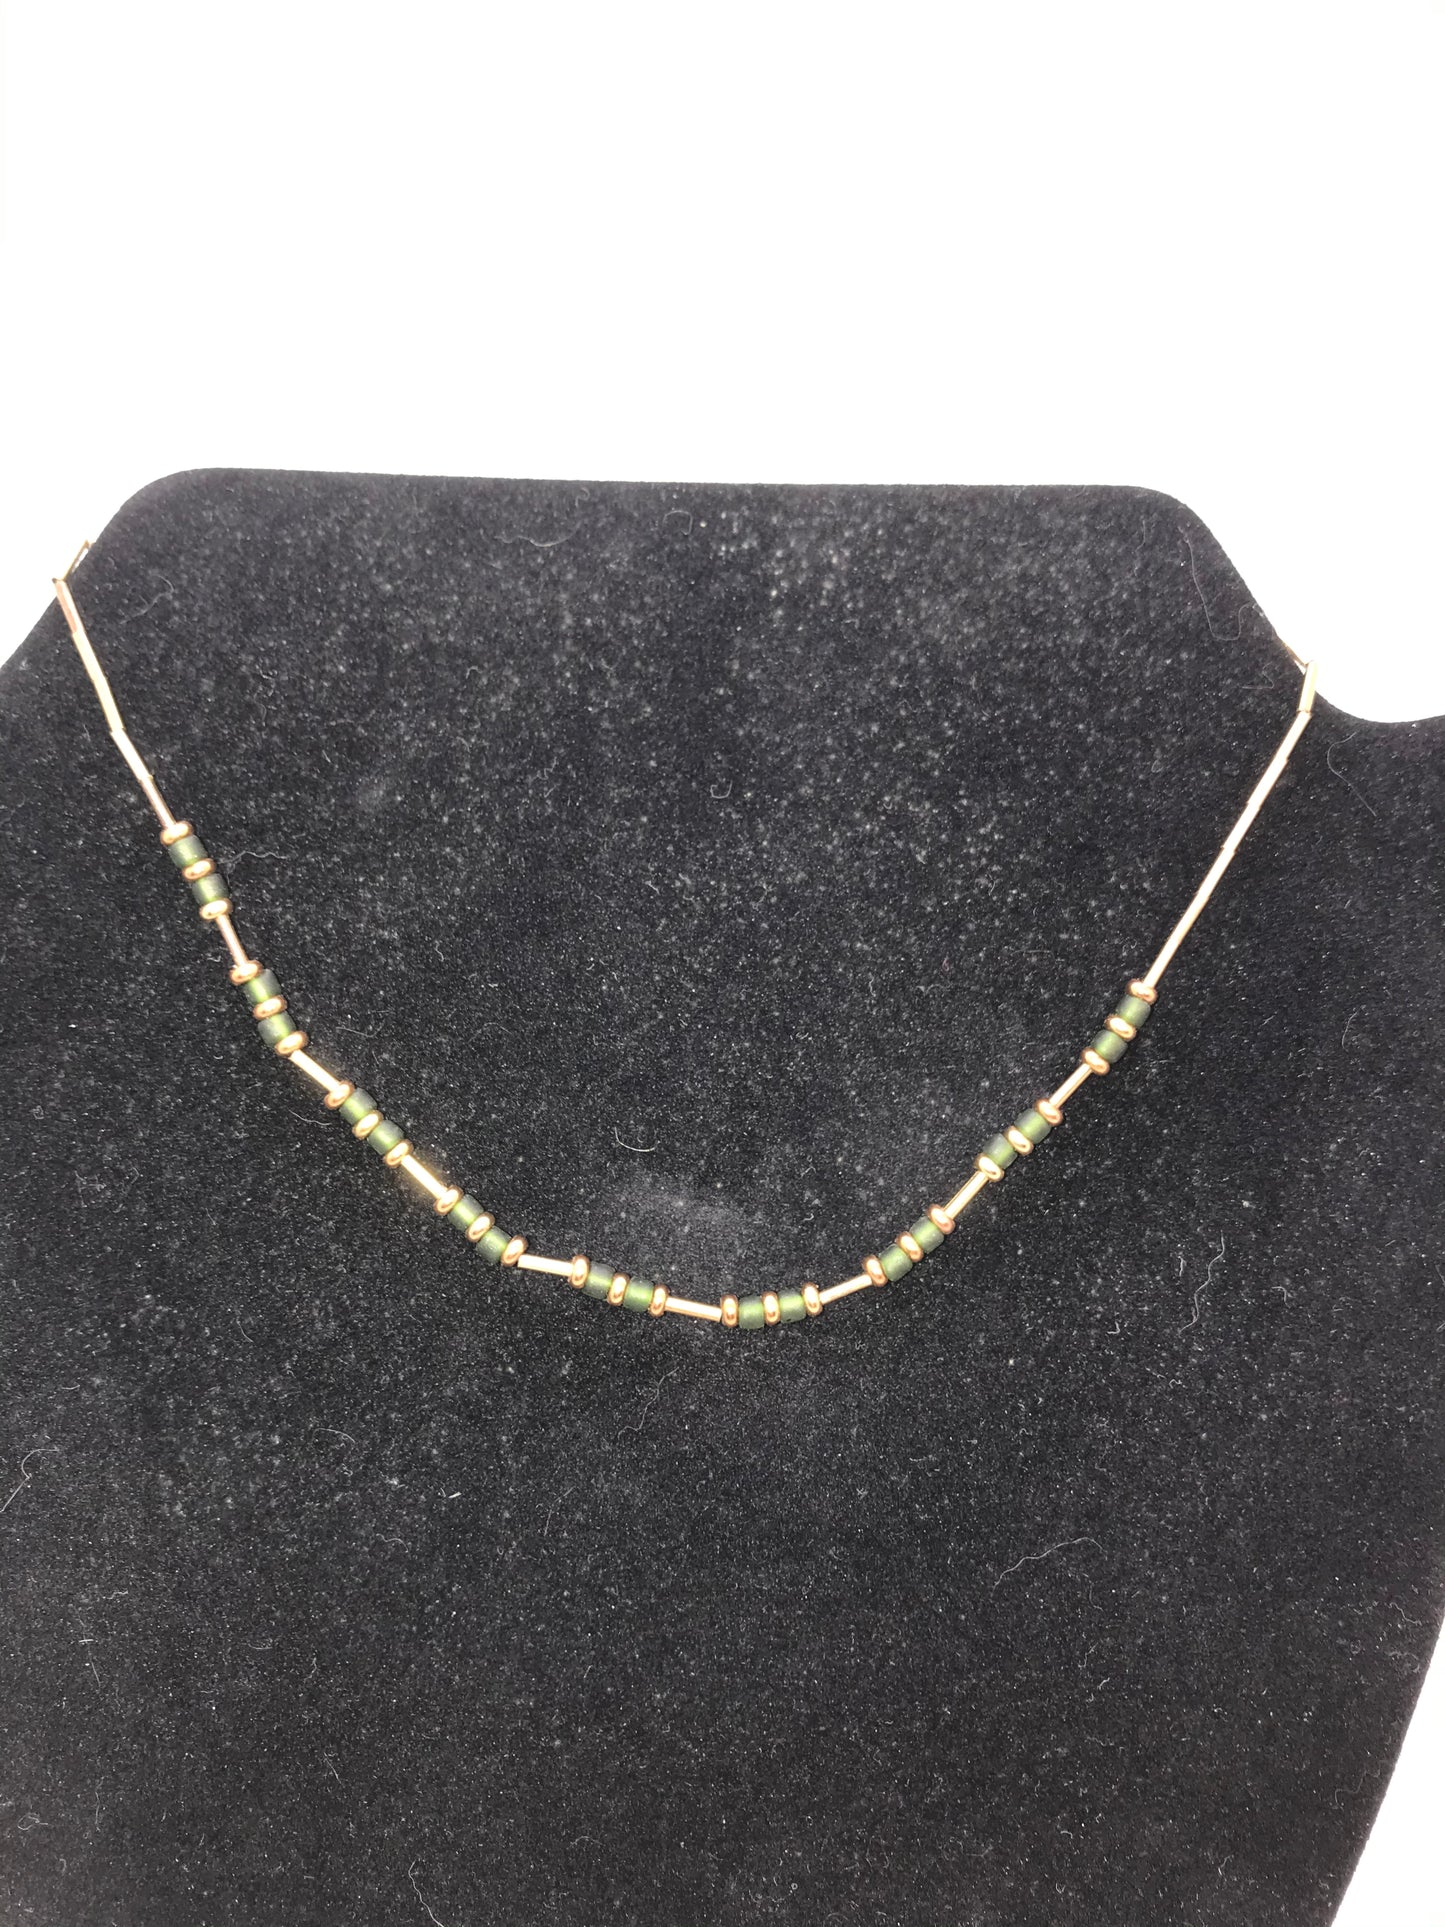 15" Green And Gold Seed Bead Handmade Beaded Necklace